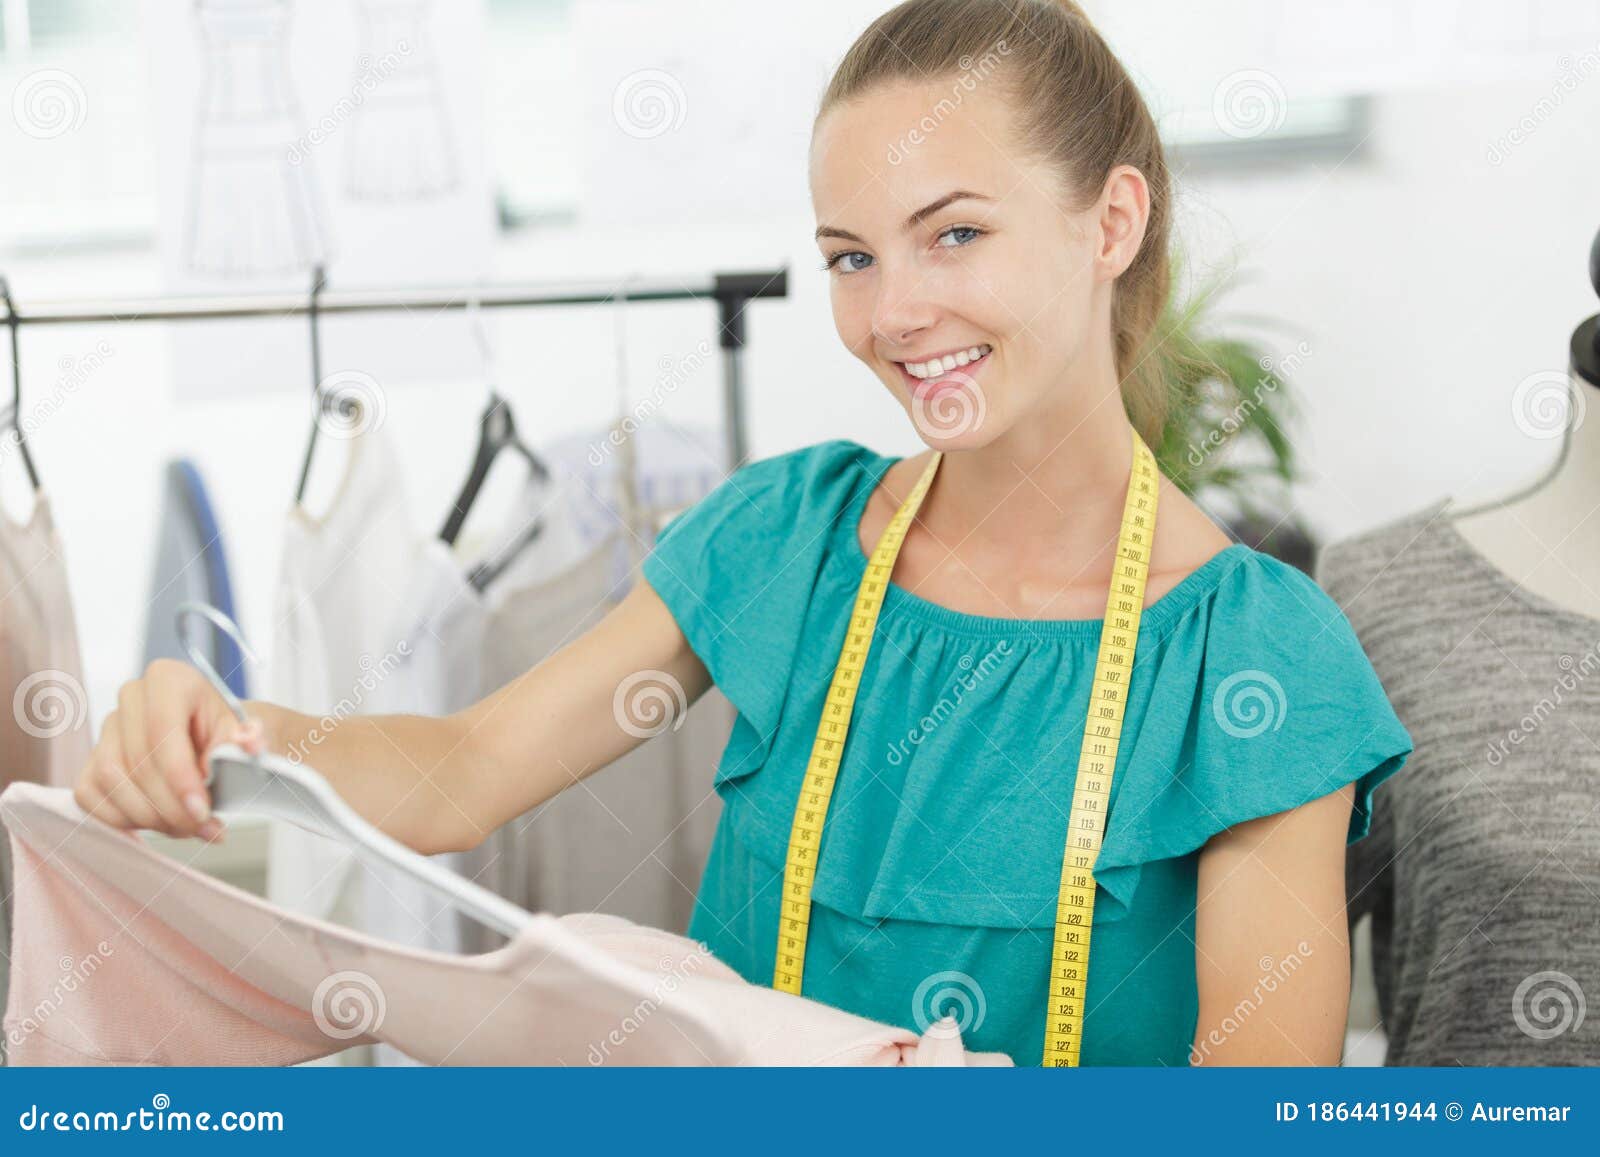 Female Shop Assistant Offering Clothes To Customer Stock Photo - Image ...